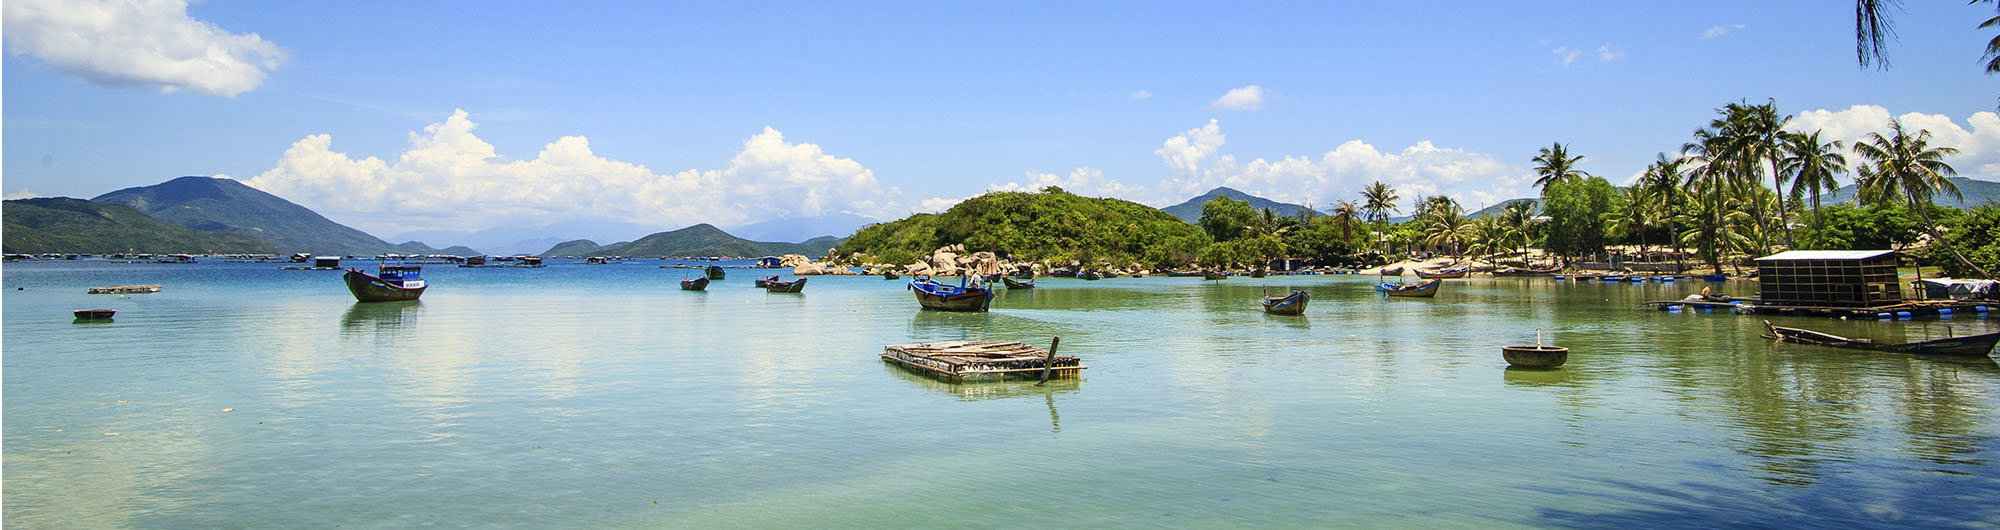 Search and compare cheap flights from Ha Noi to Nha Trang